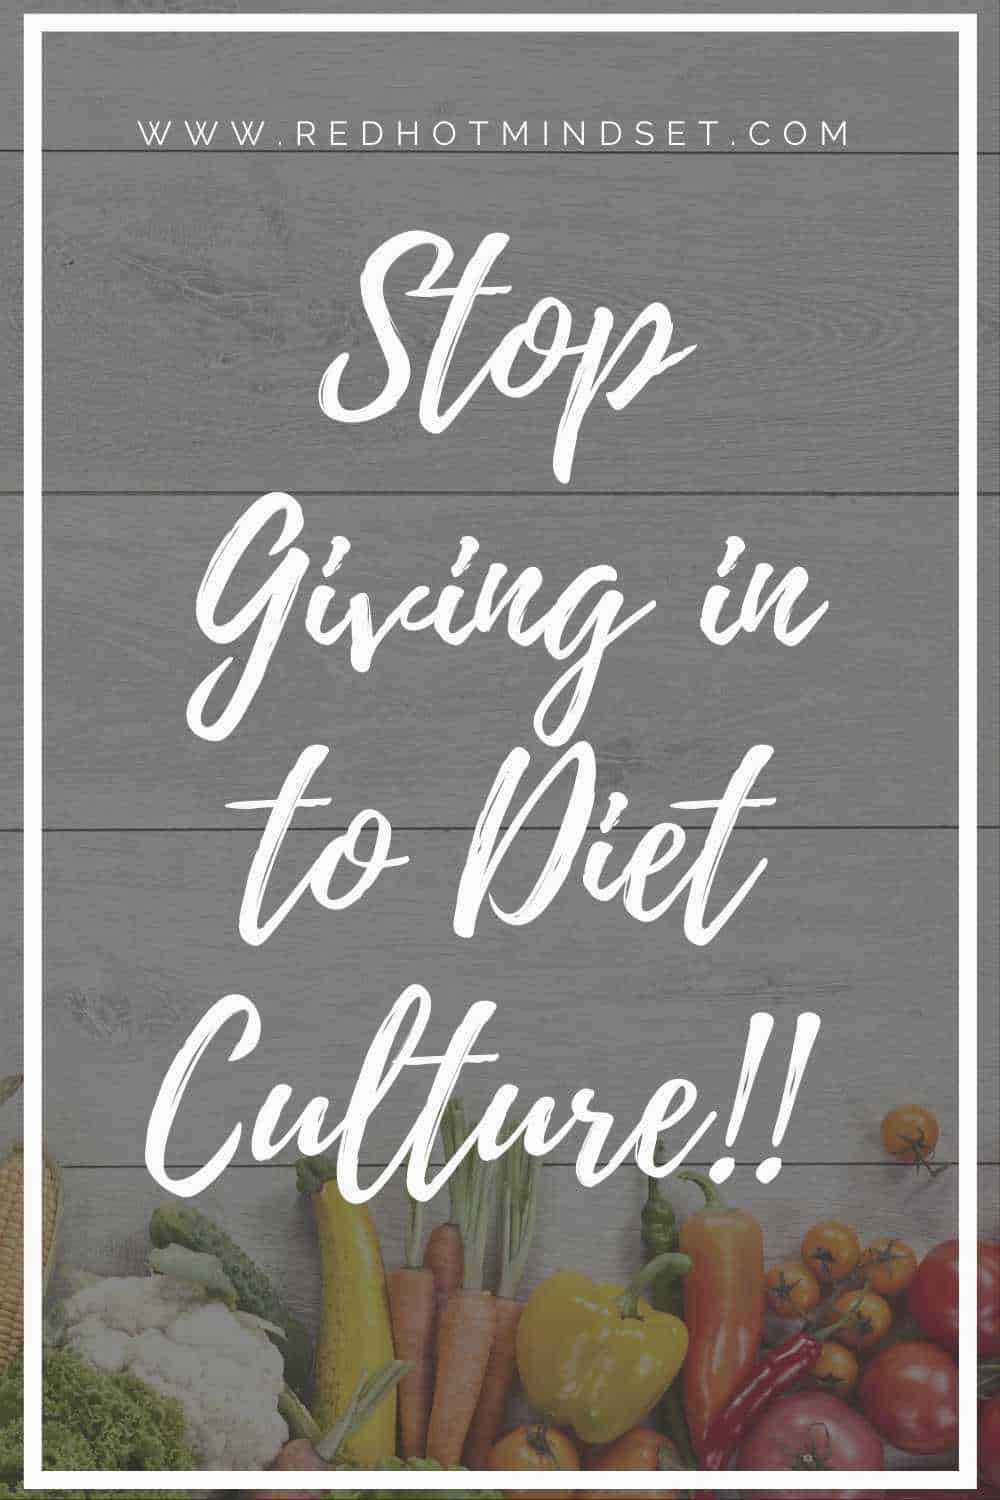 Ep 82 | How I Stopped Giving in to Diet Culture and Overcame My Eating Disorder